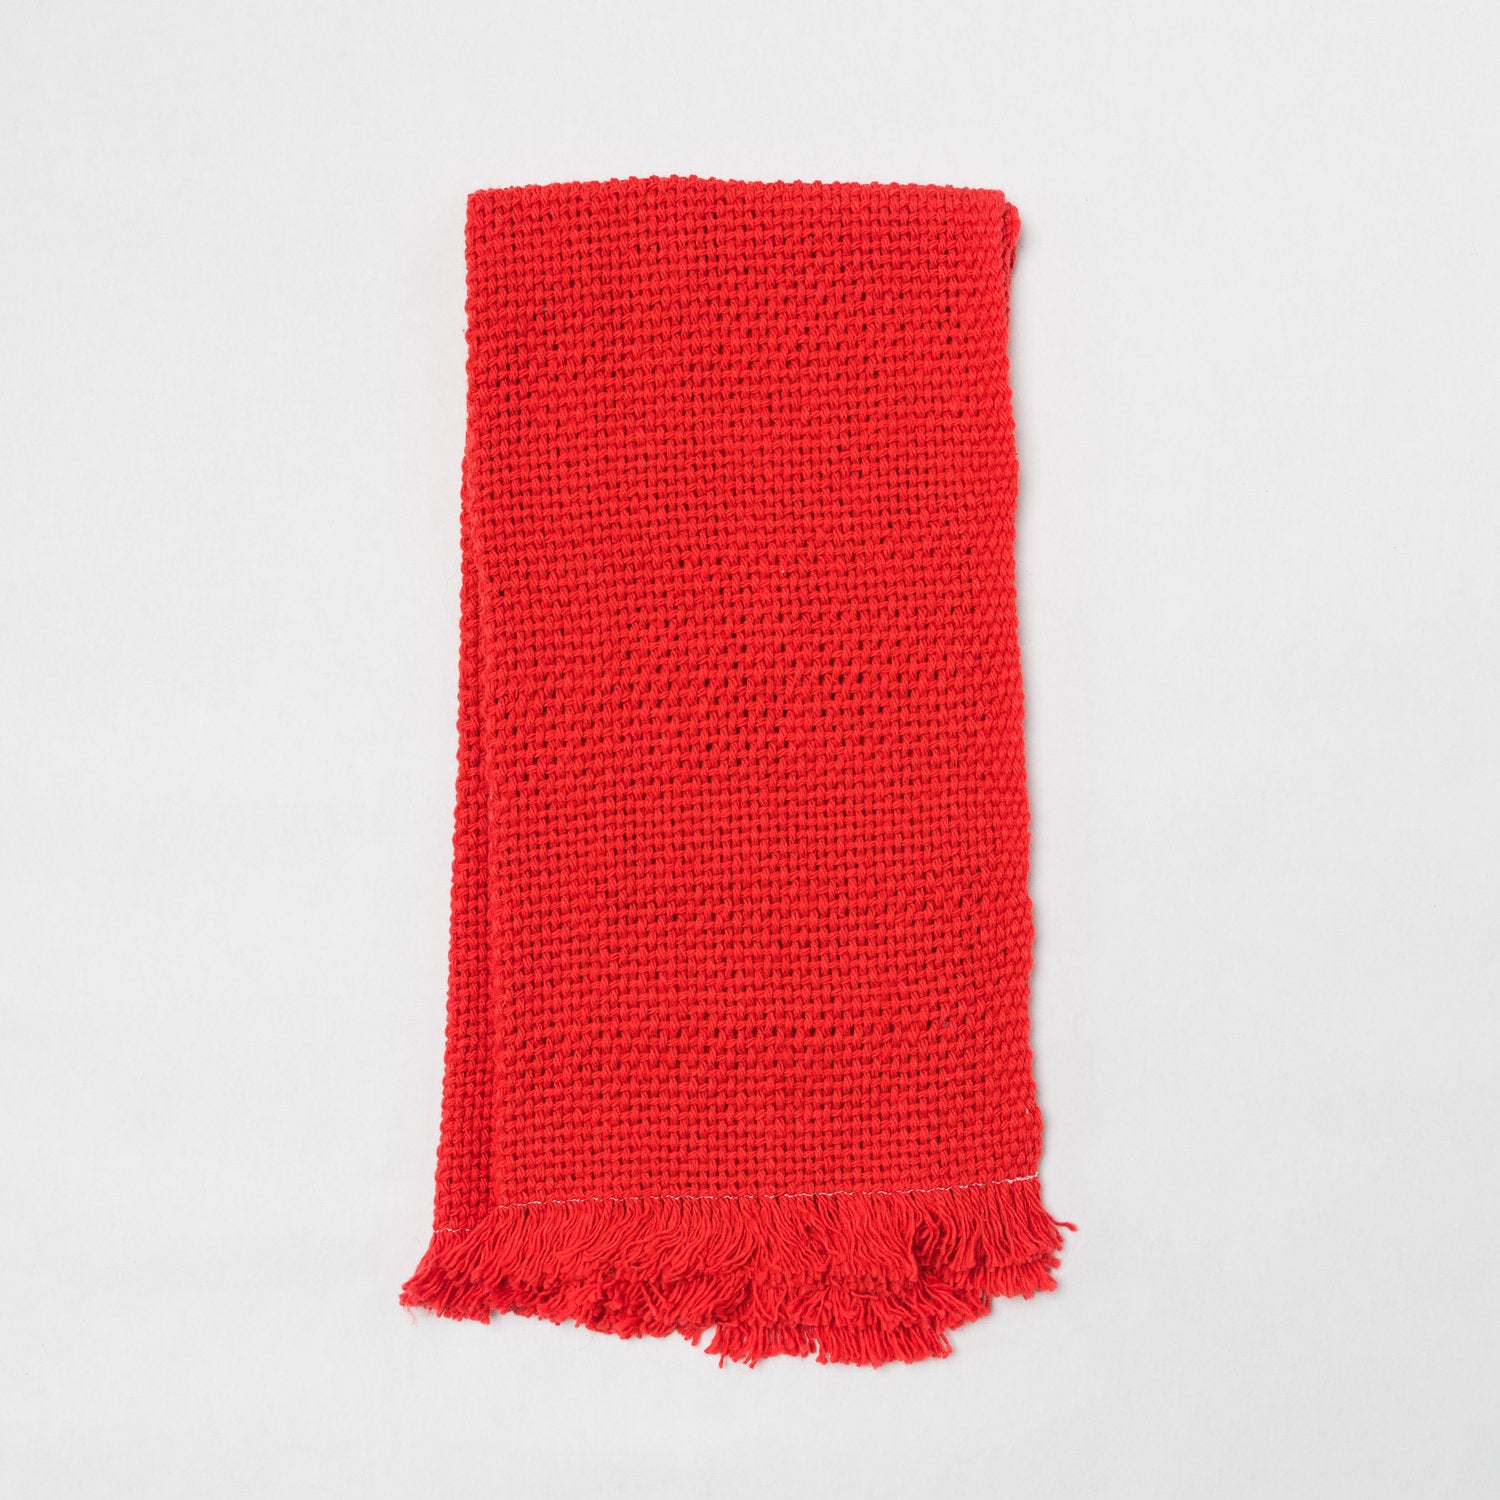 KD Weave Red Hand Towel, Set of 2